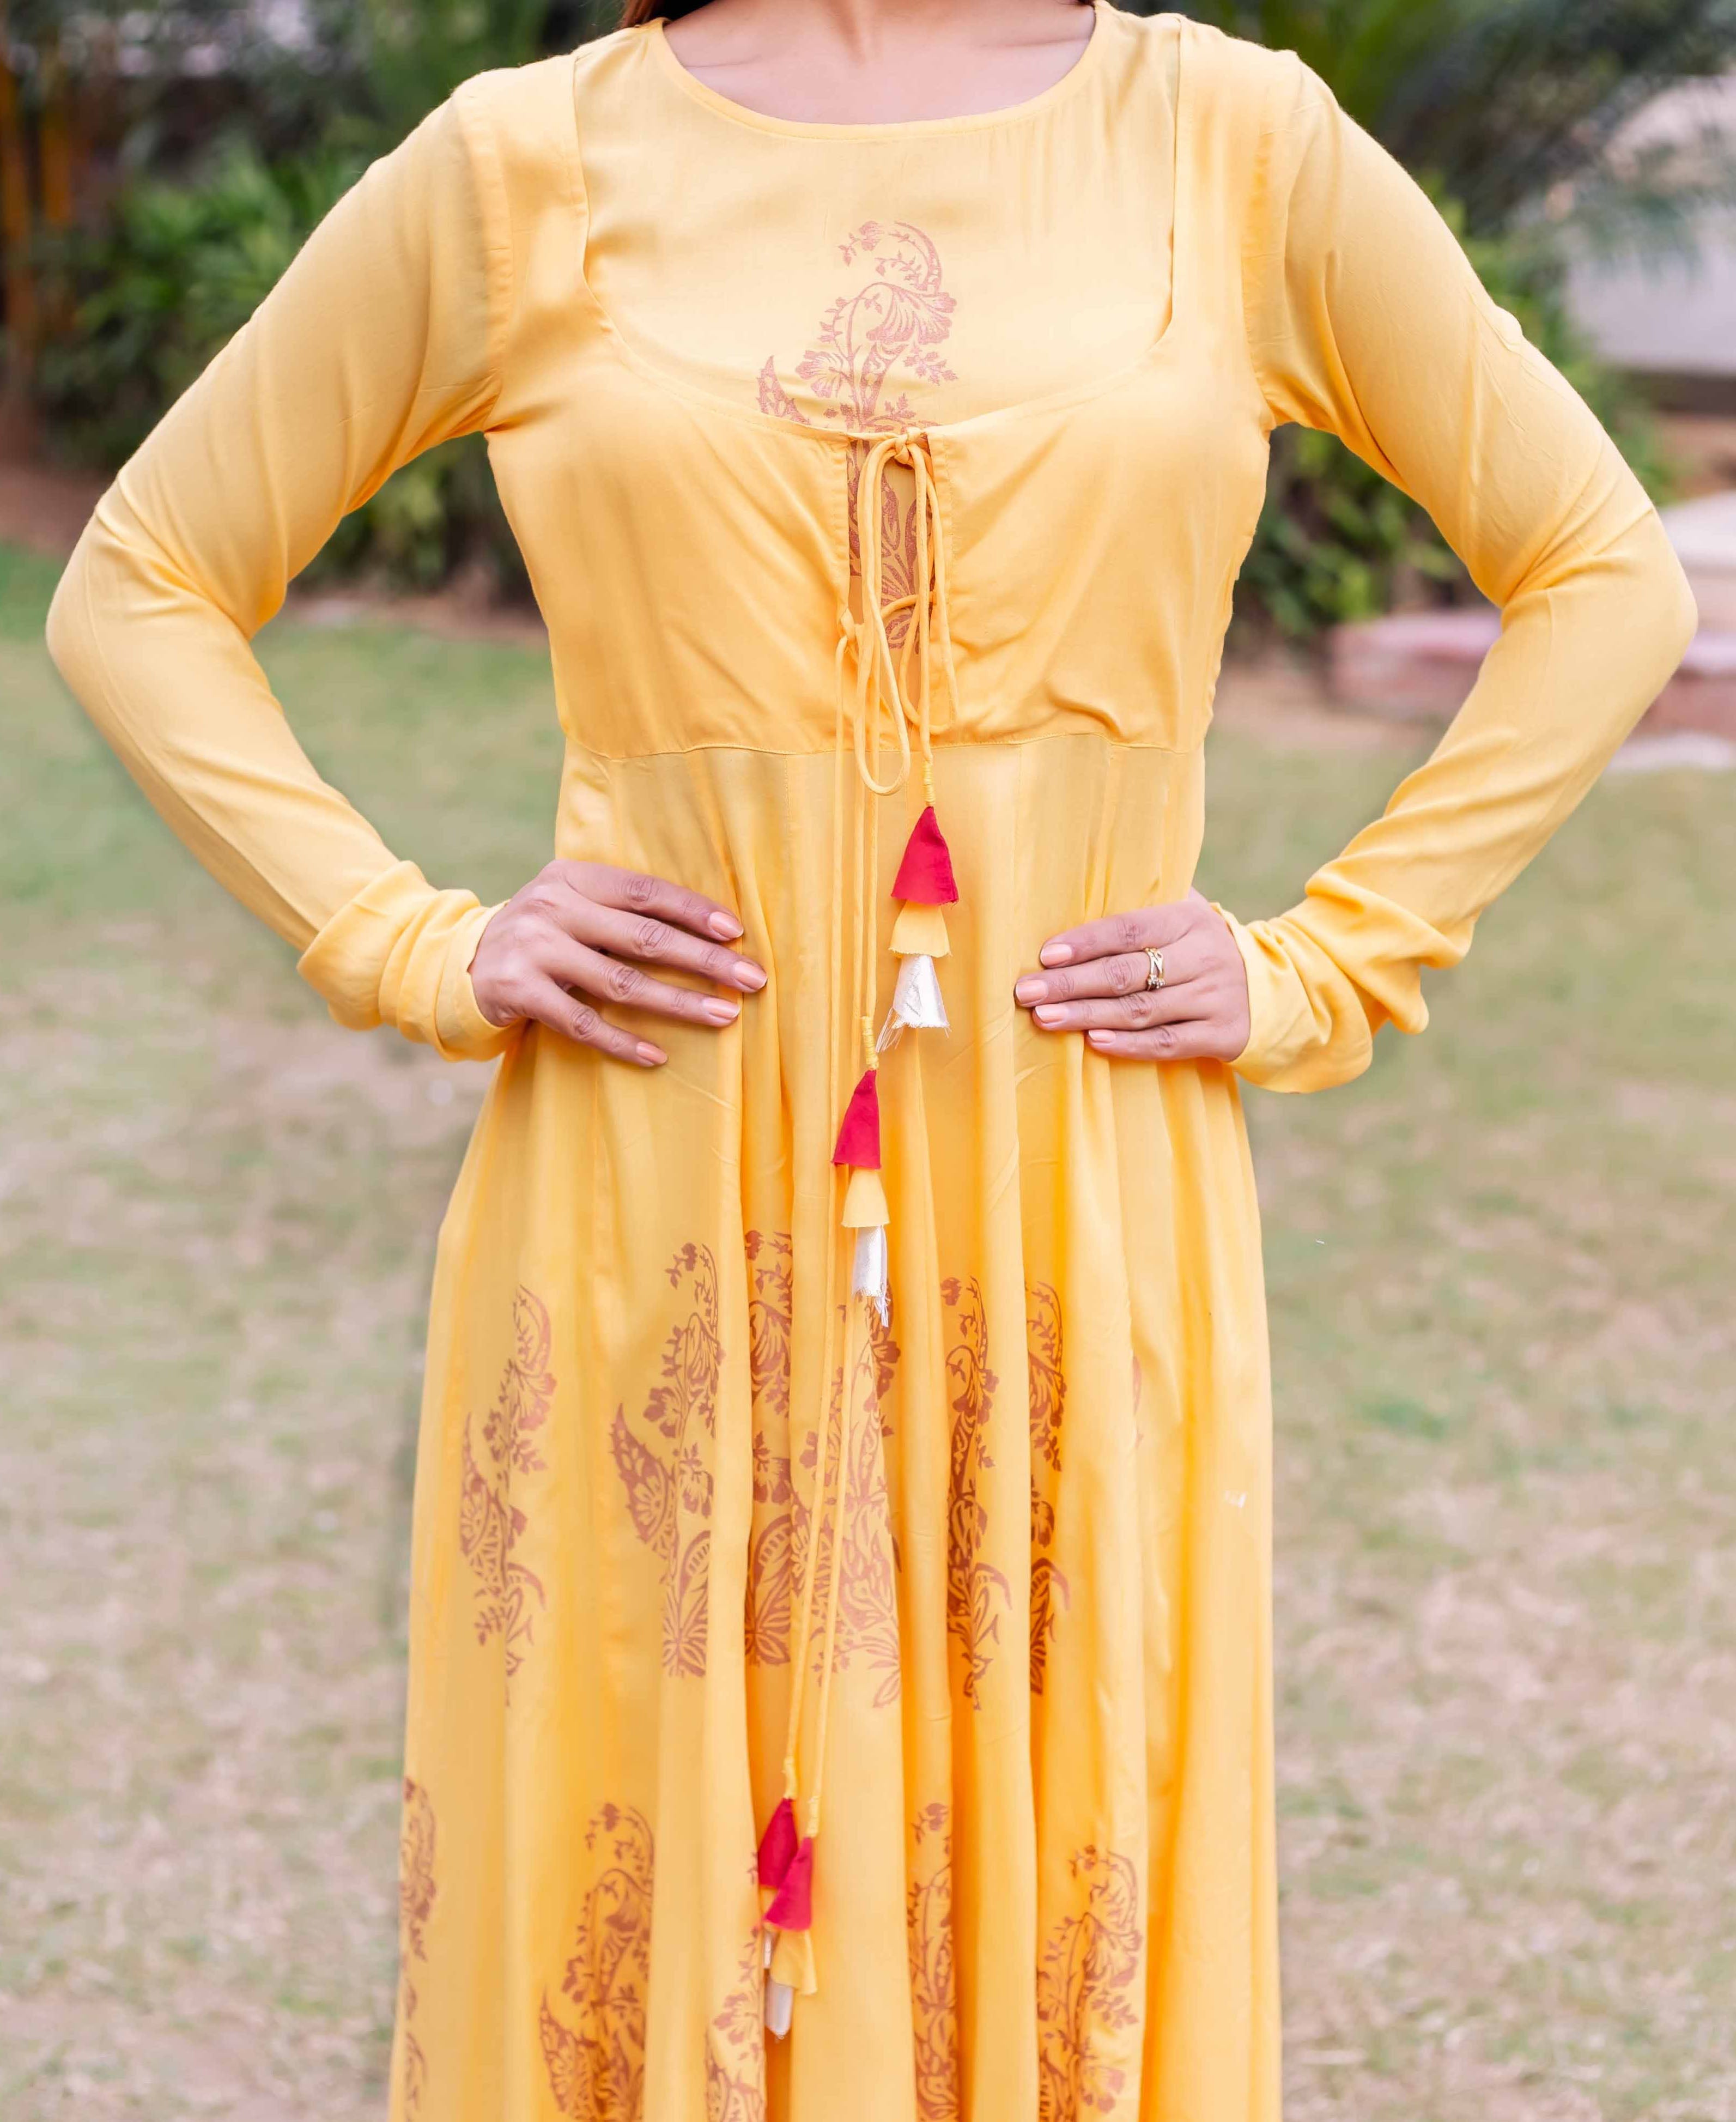 Payal Rajput radiates with grace in her elegant bright yellow Anarkali suit